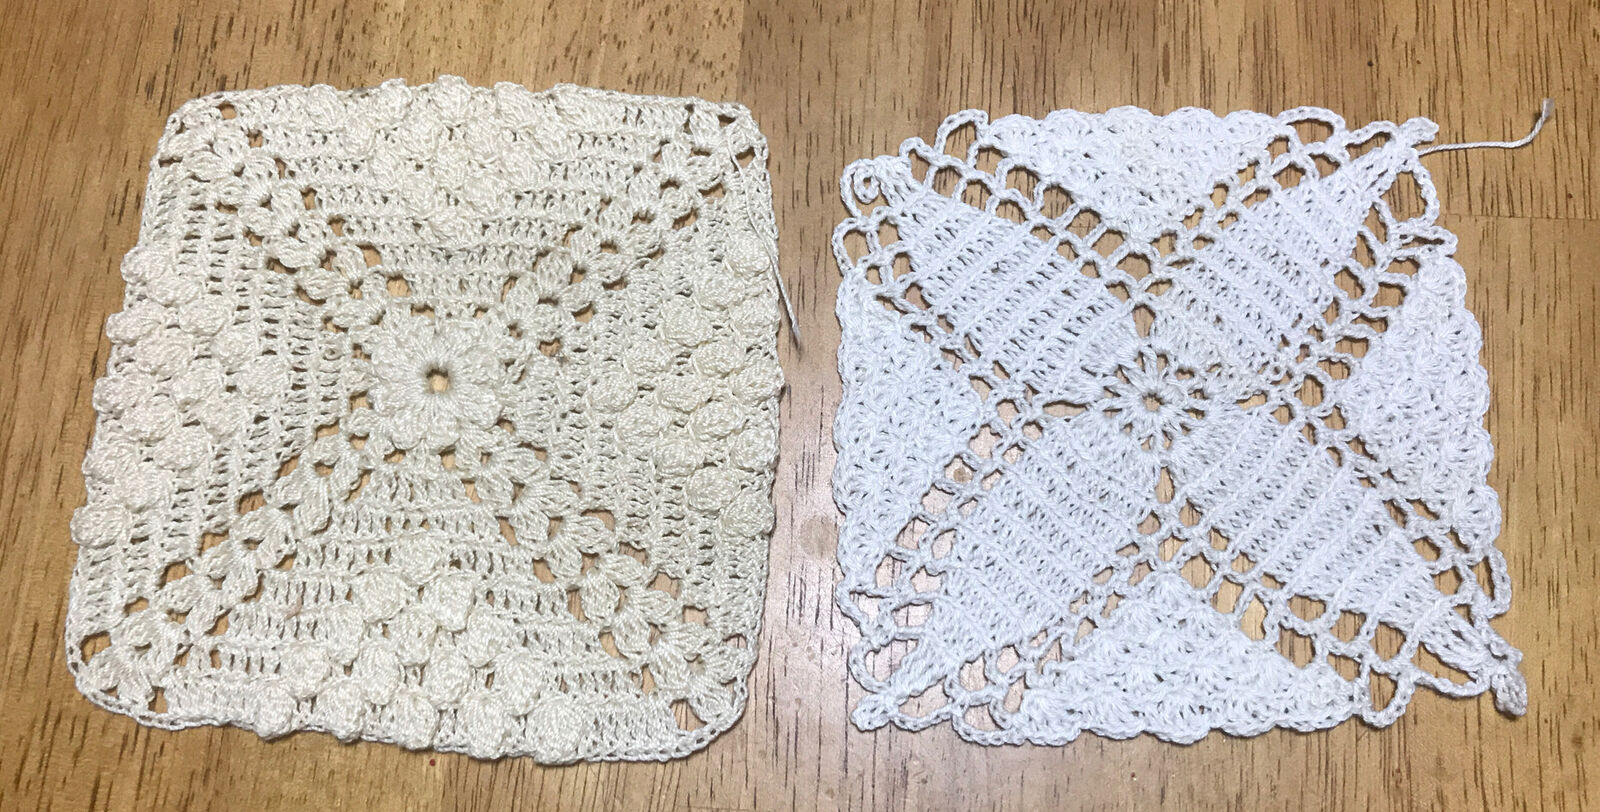 Vintage 1960s-70s Crocheted Doilies Handmade Two New White Square 5x5” 